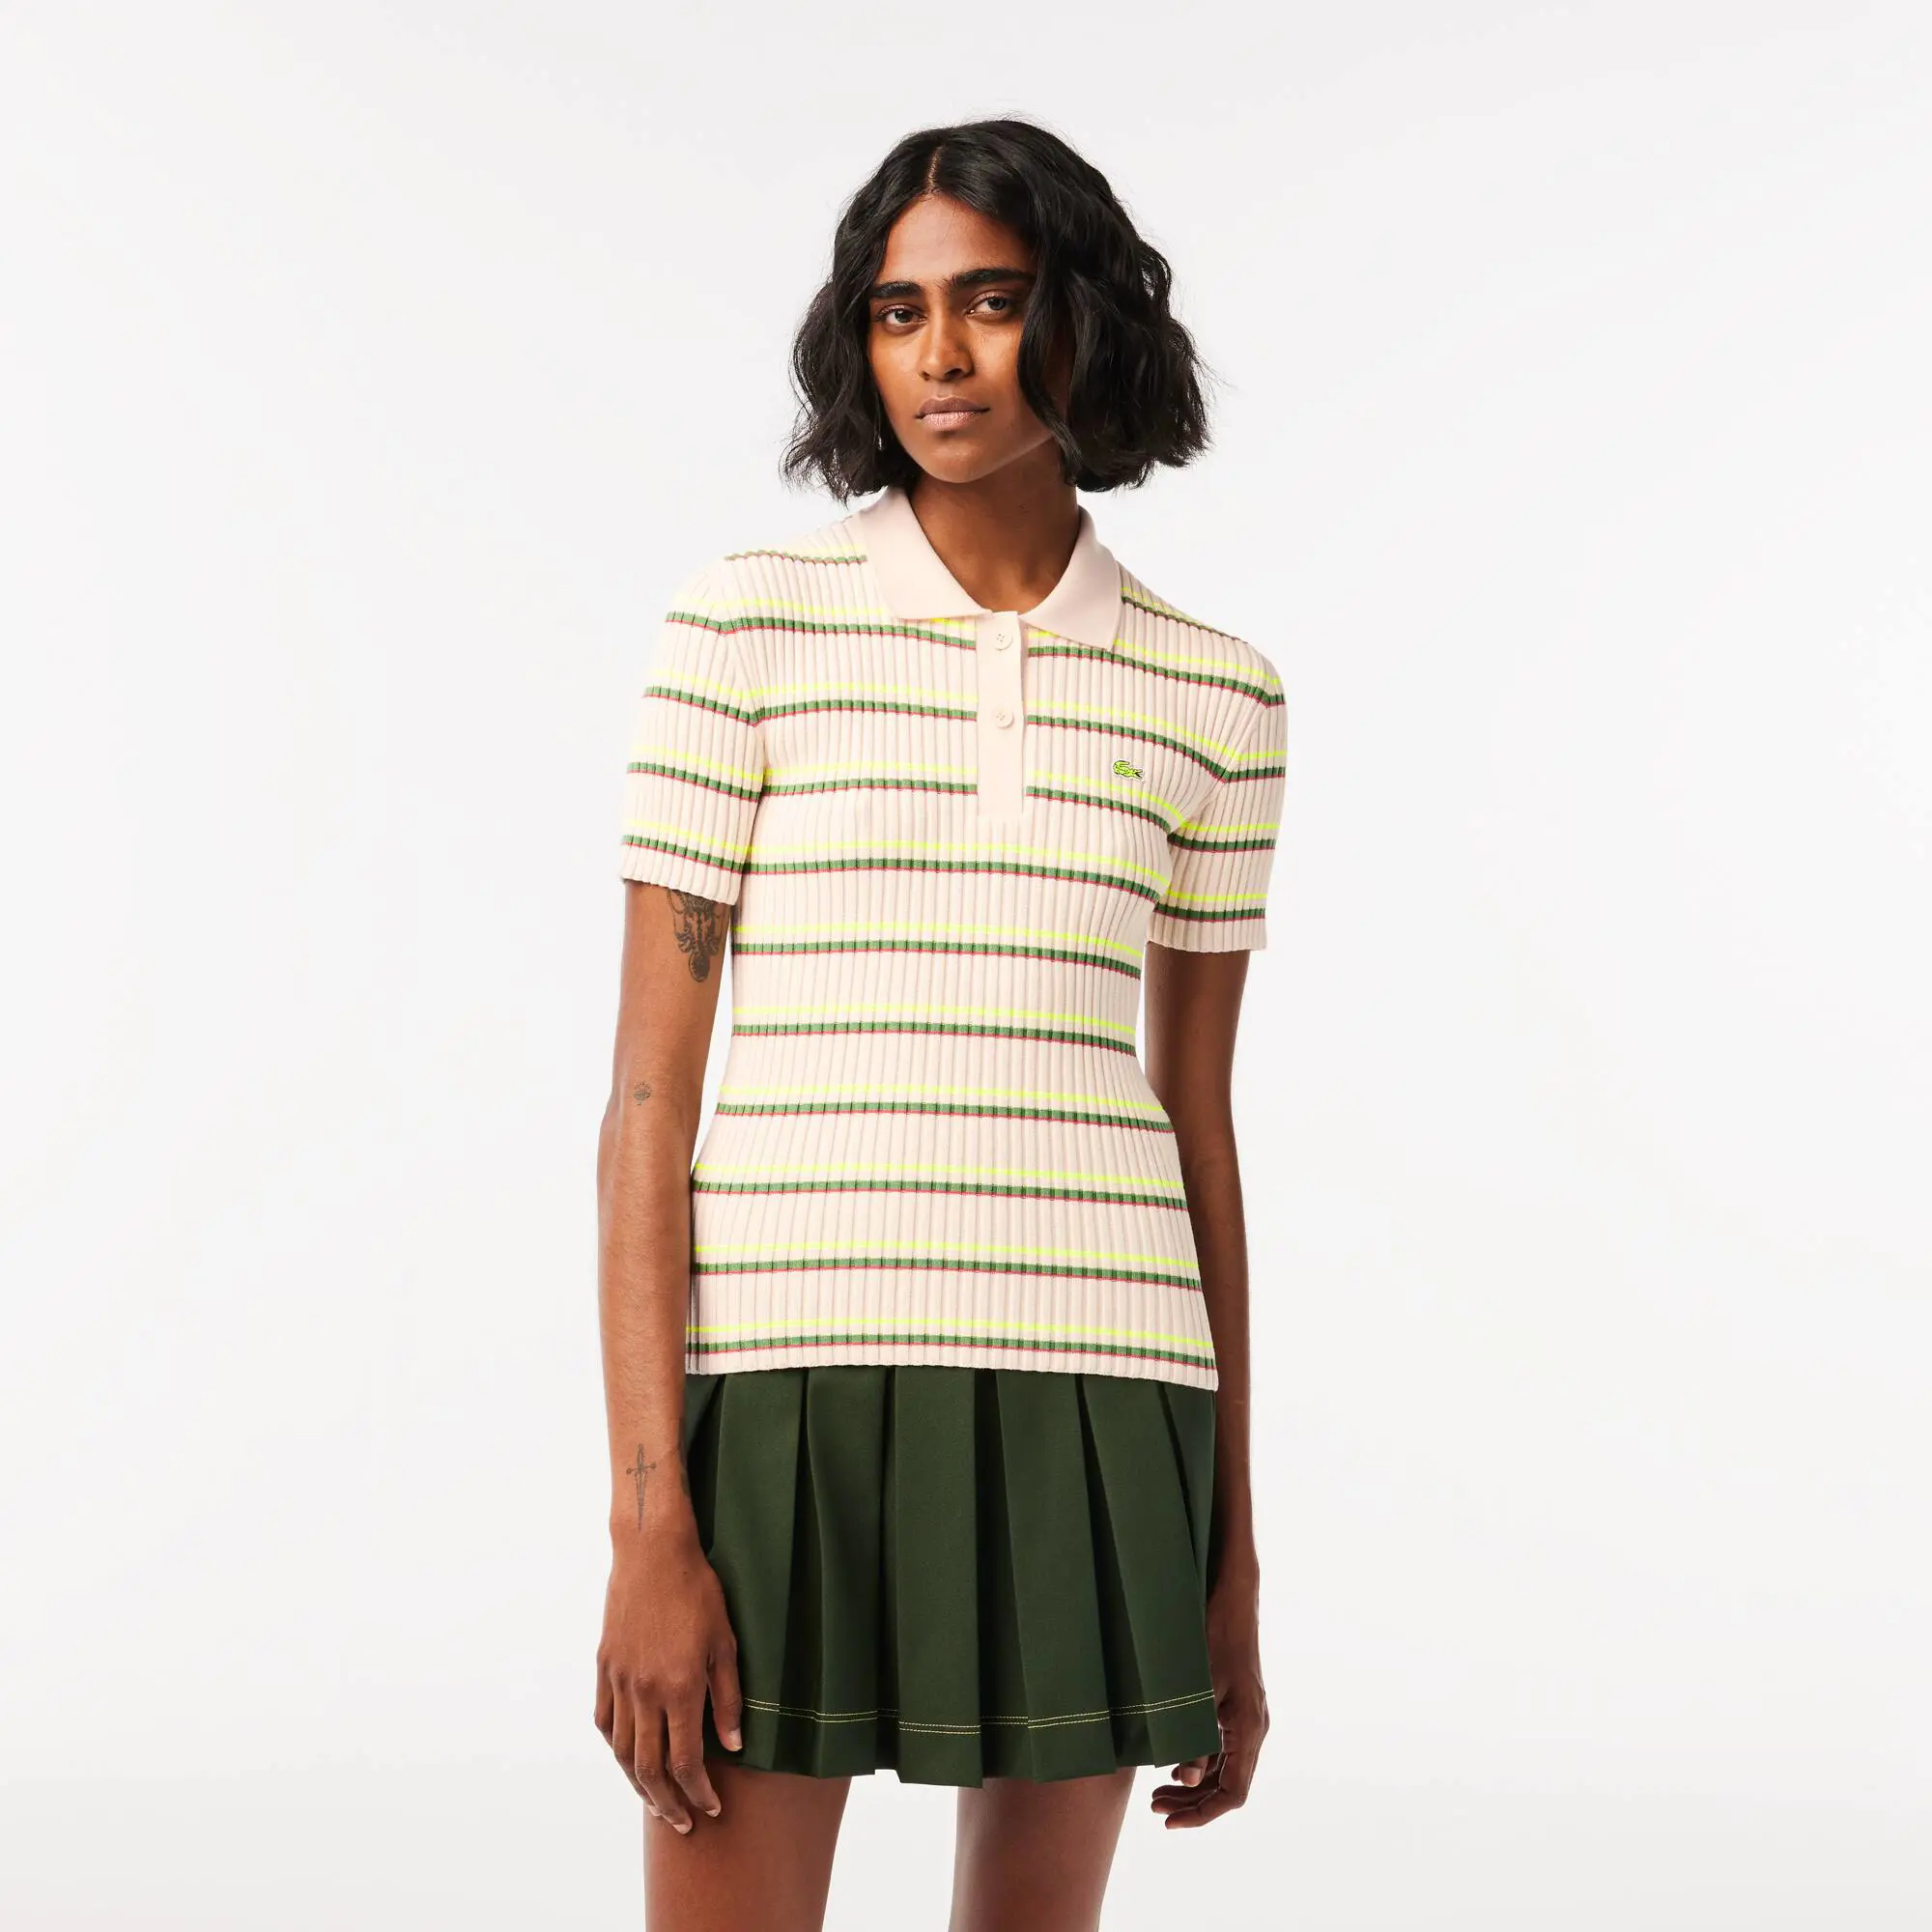 Lacoste Women’s Lacoste Organic Cotton French Made Striped Polo Shirt. 1